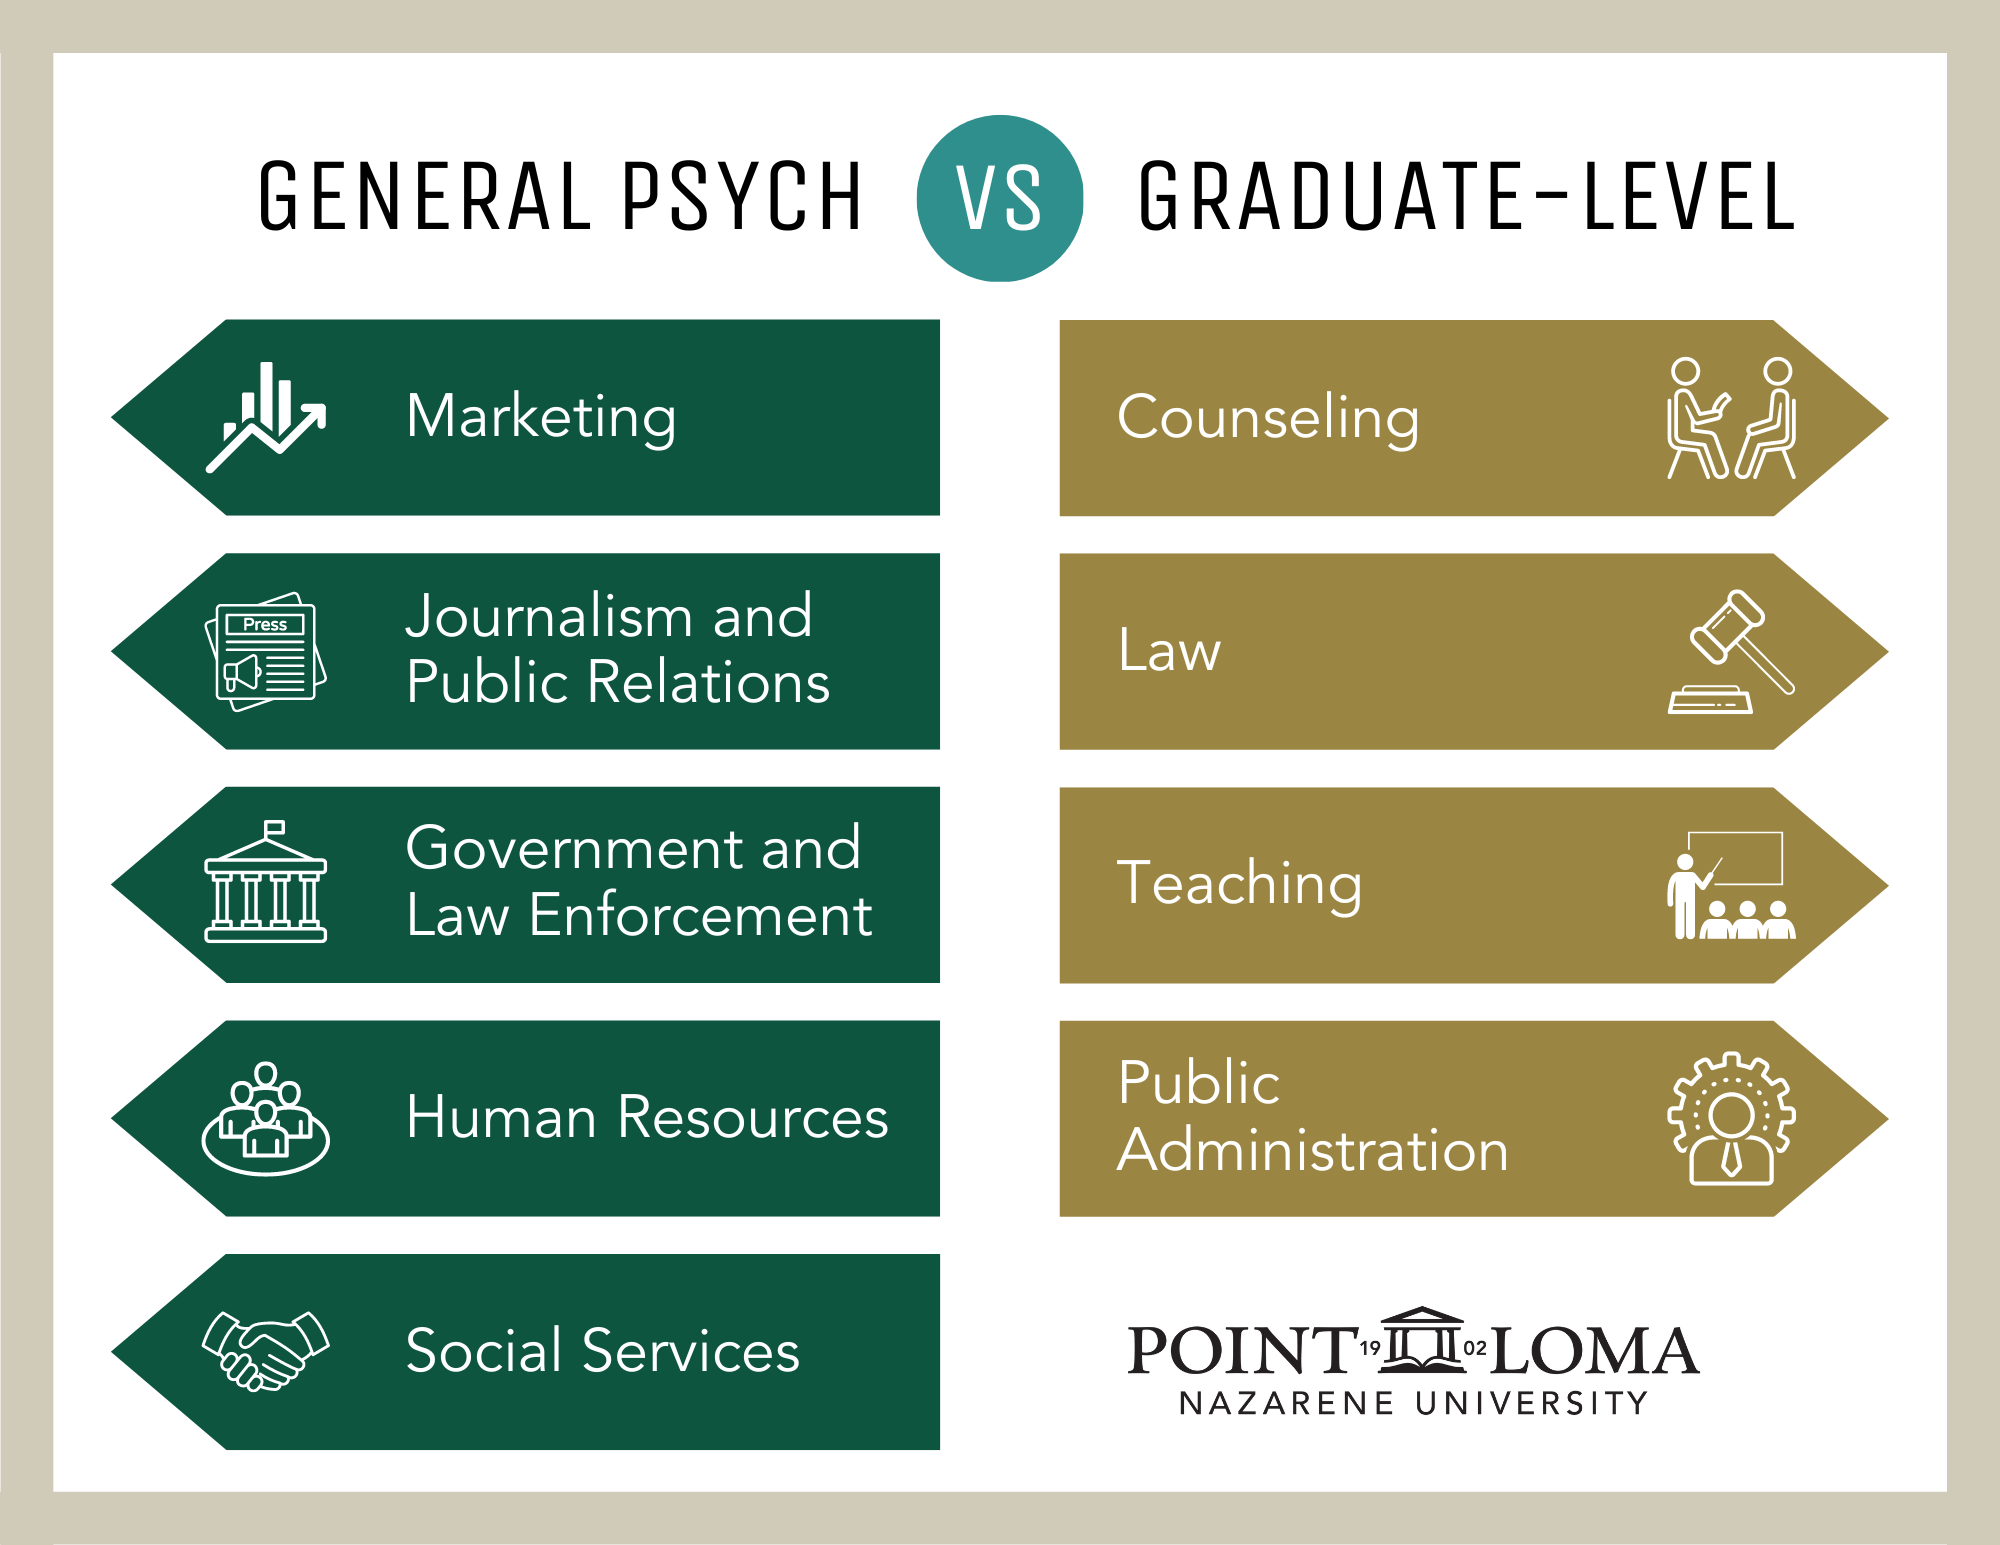 Psychology careers, General Psych Degree: Marketing, Journalism/ PR, Government/ Law Enforcement, Human Resources, Social Services Graduate Level: Counseling, Law, Teaching, Public Administration 